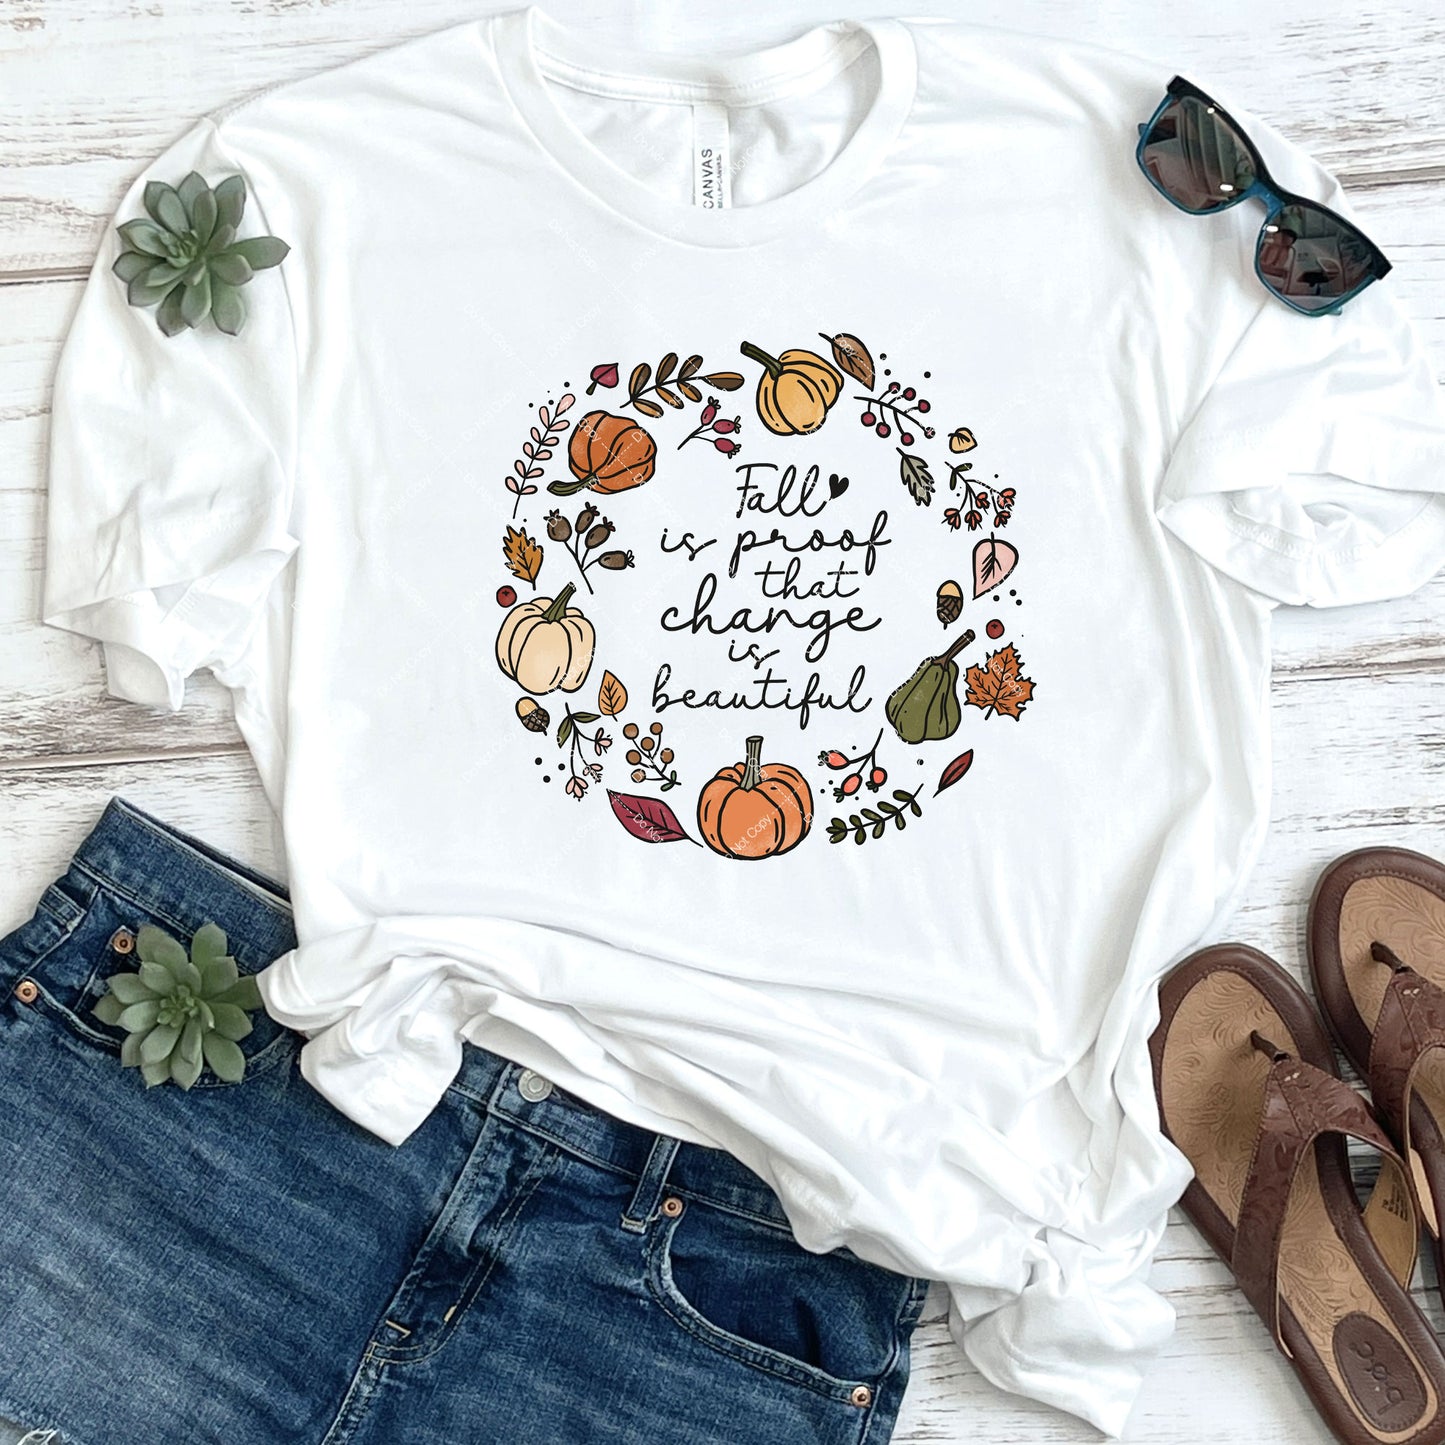 Fall Is Proof That Change Is Beautiful T-Shirt